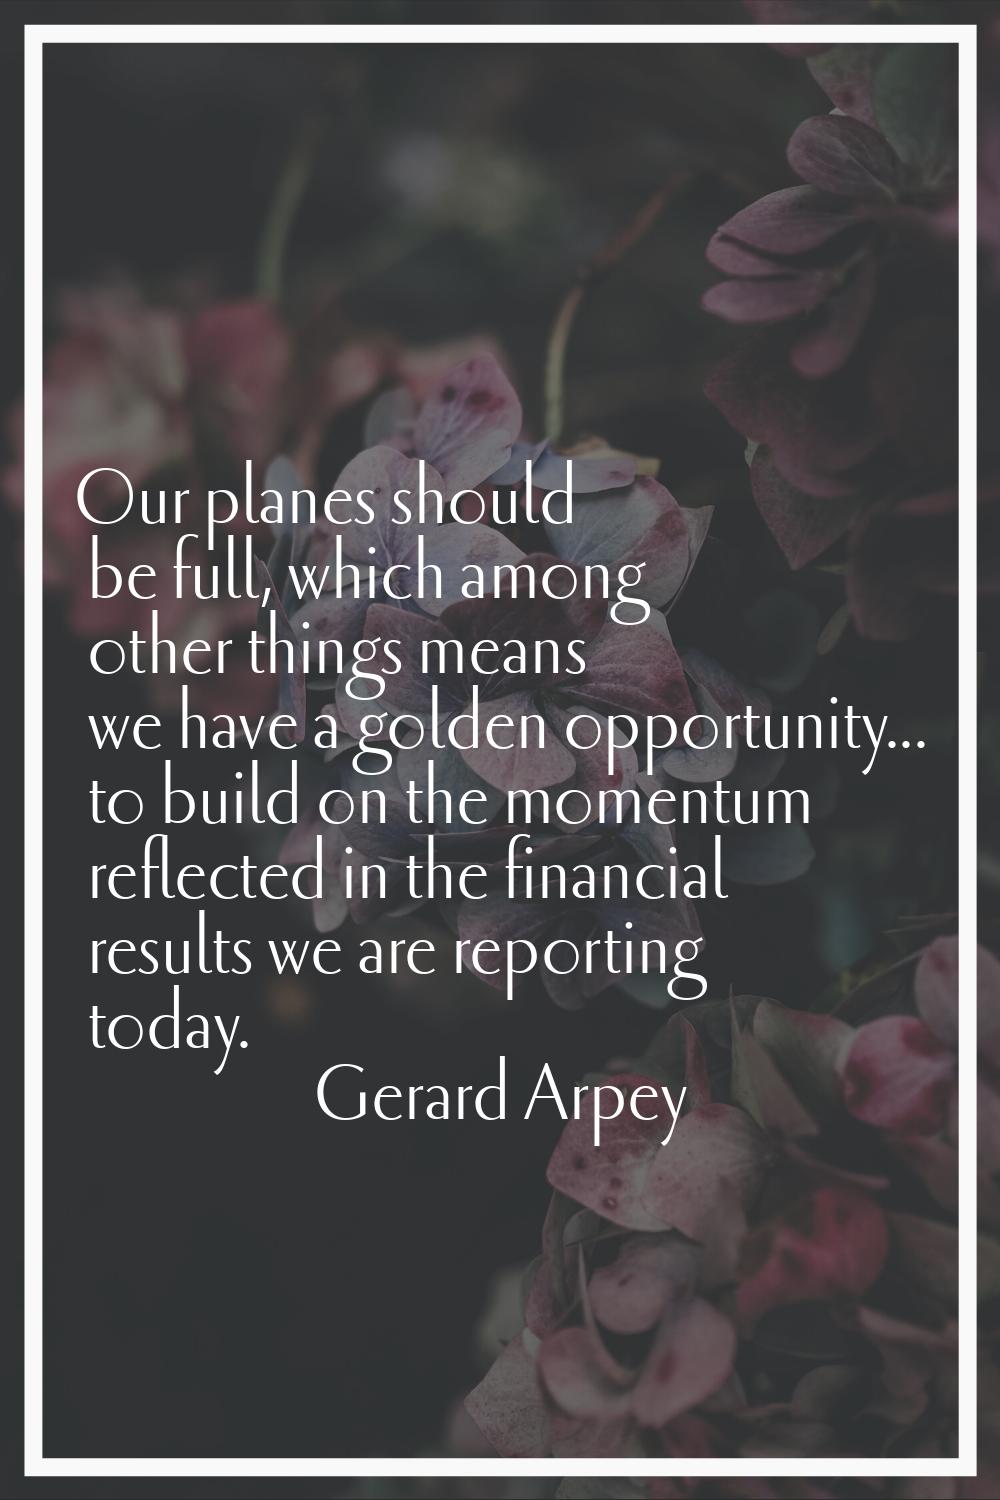 Our planes should be full, which among other things means we have a golden opportunity... to build 